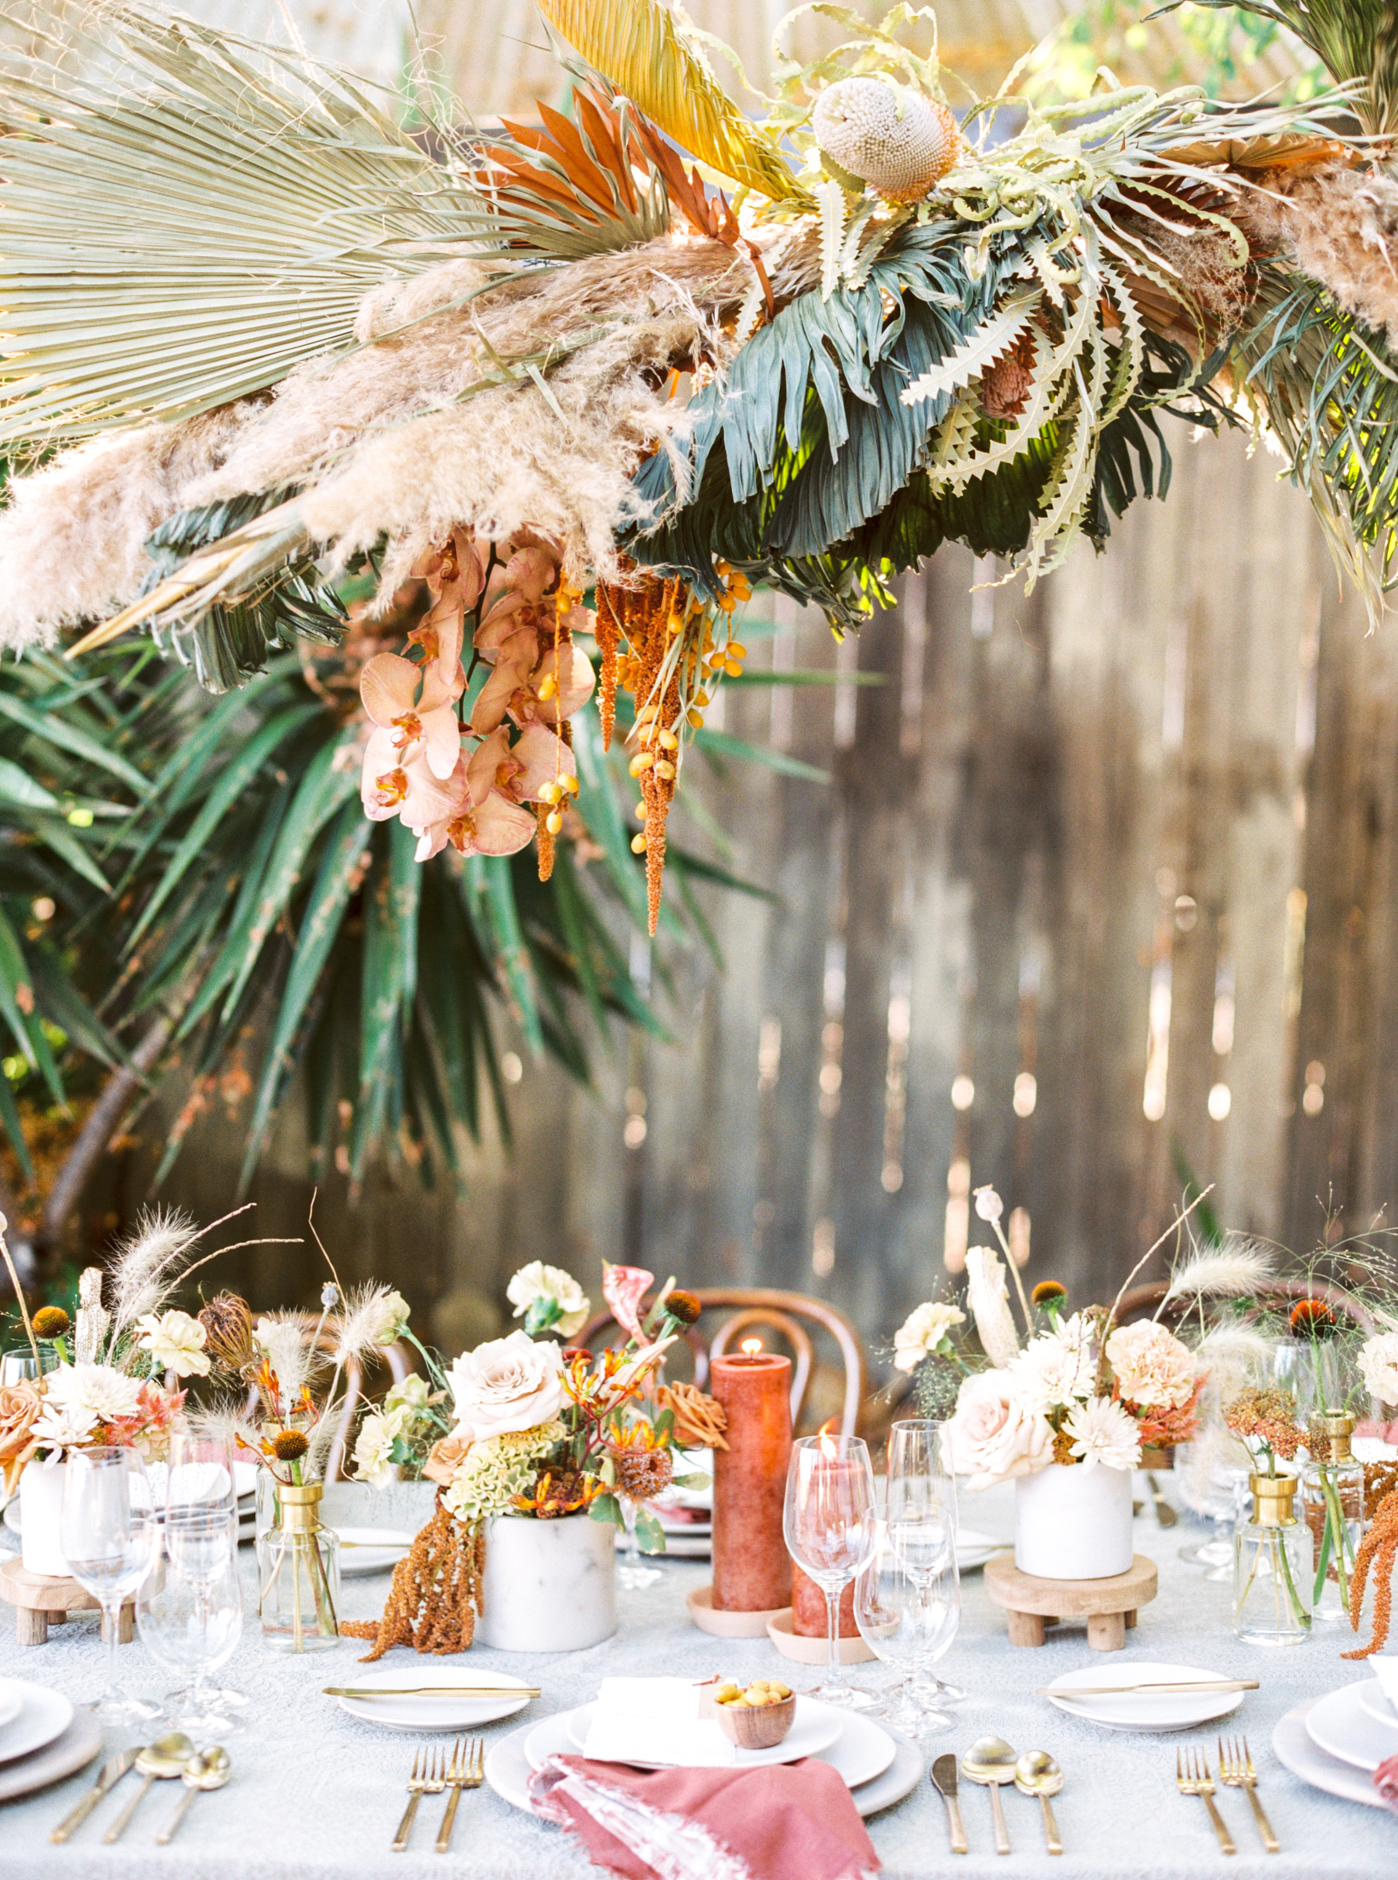 Reinstein Ranch Wedding Inspiration Shoot Tablescape with hanging dried floral installation and terracotta colors